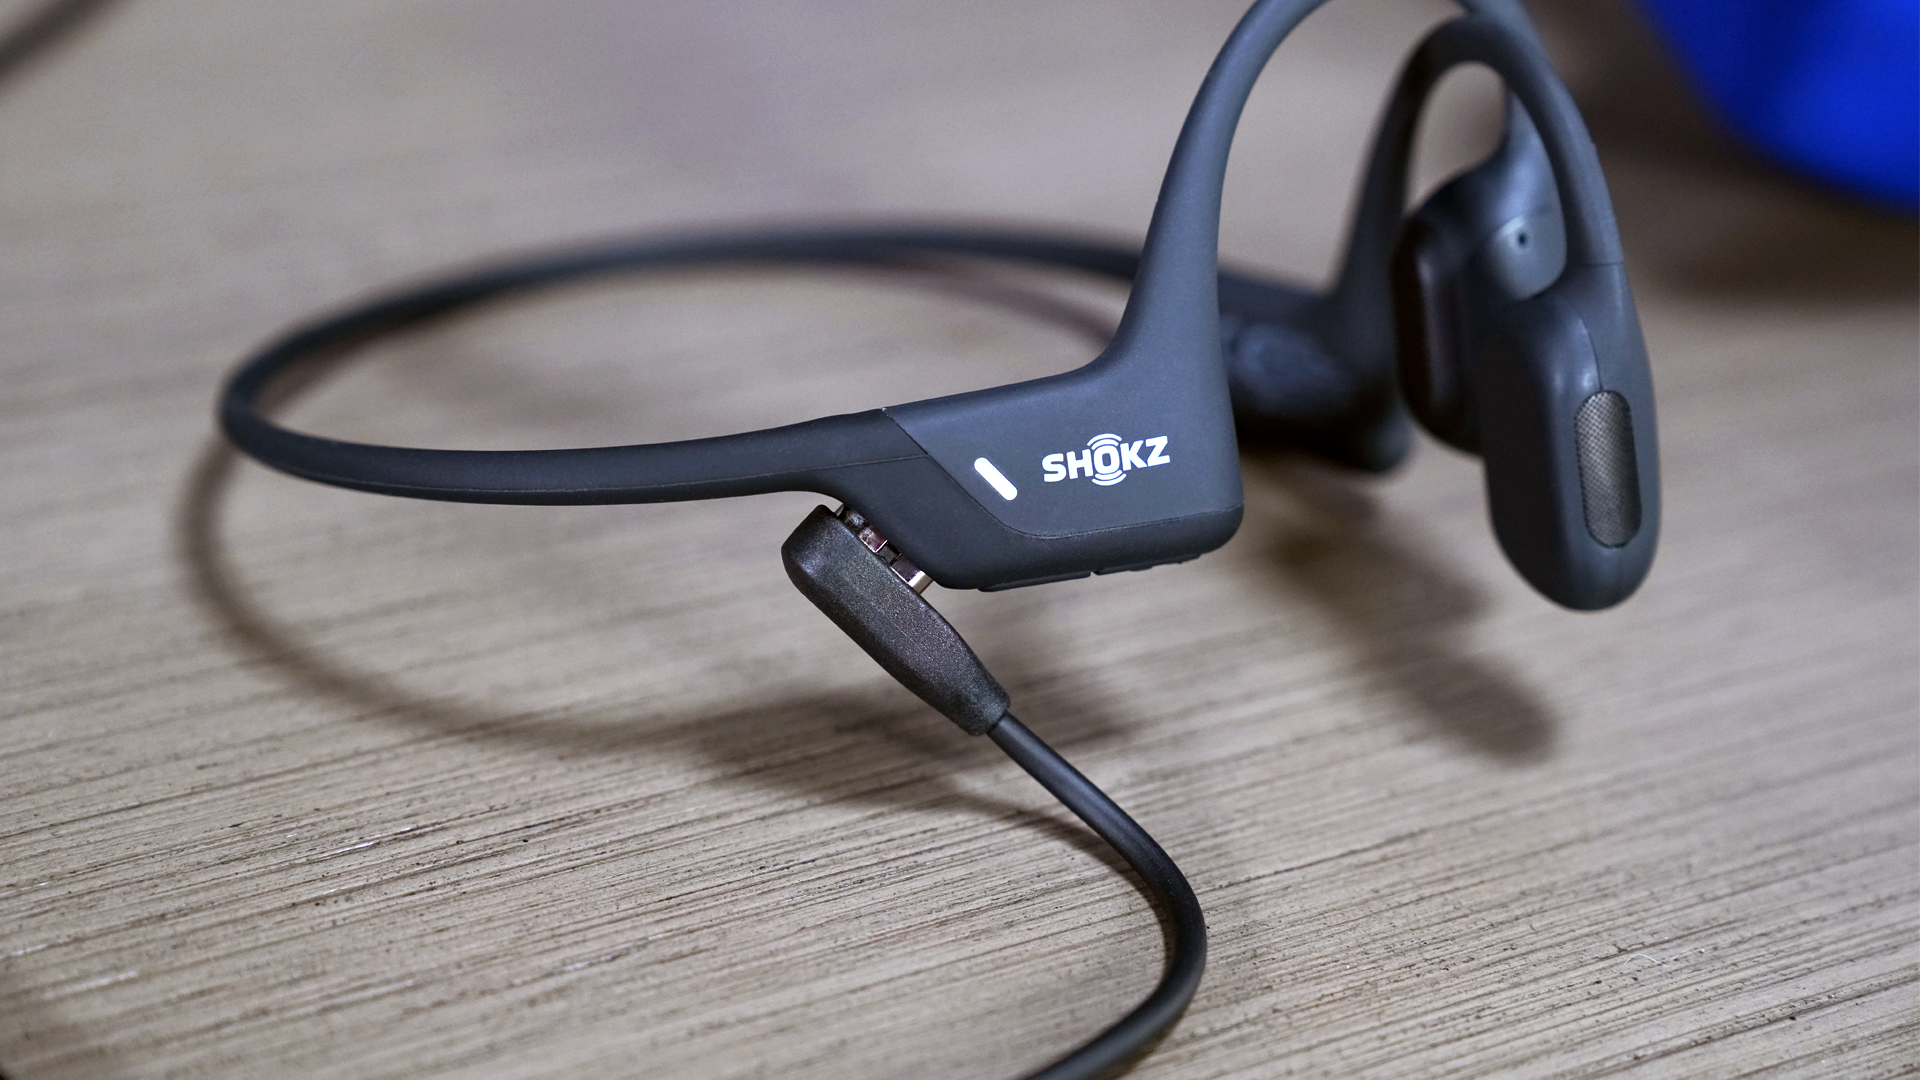 The Shokz OpenRun Pro bone conduction headphones plugged in and charging via the included proprietary charging cord.